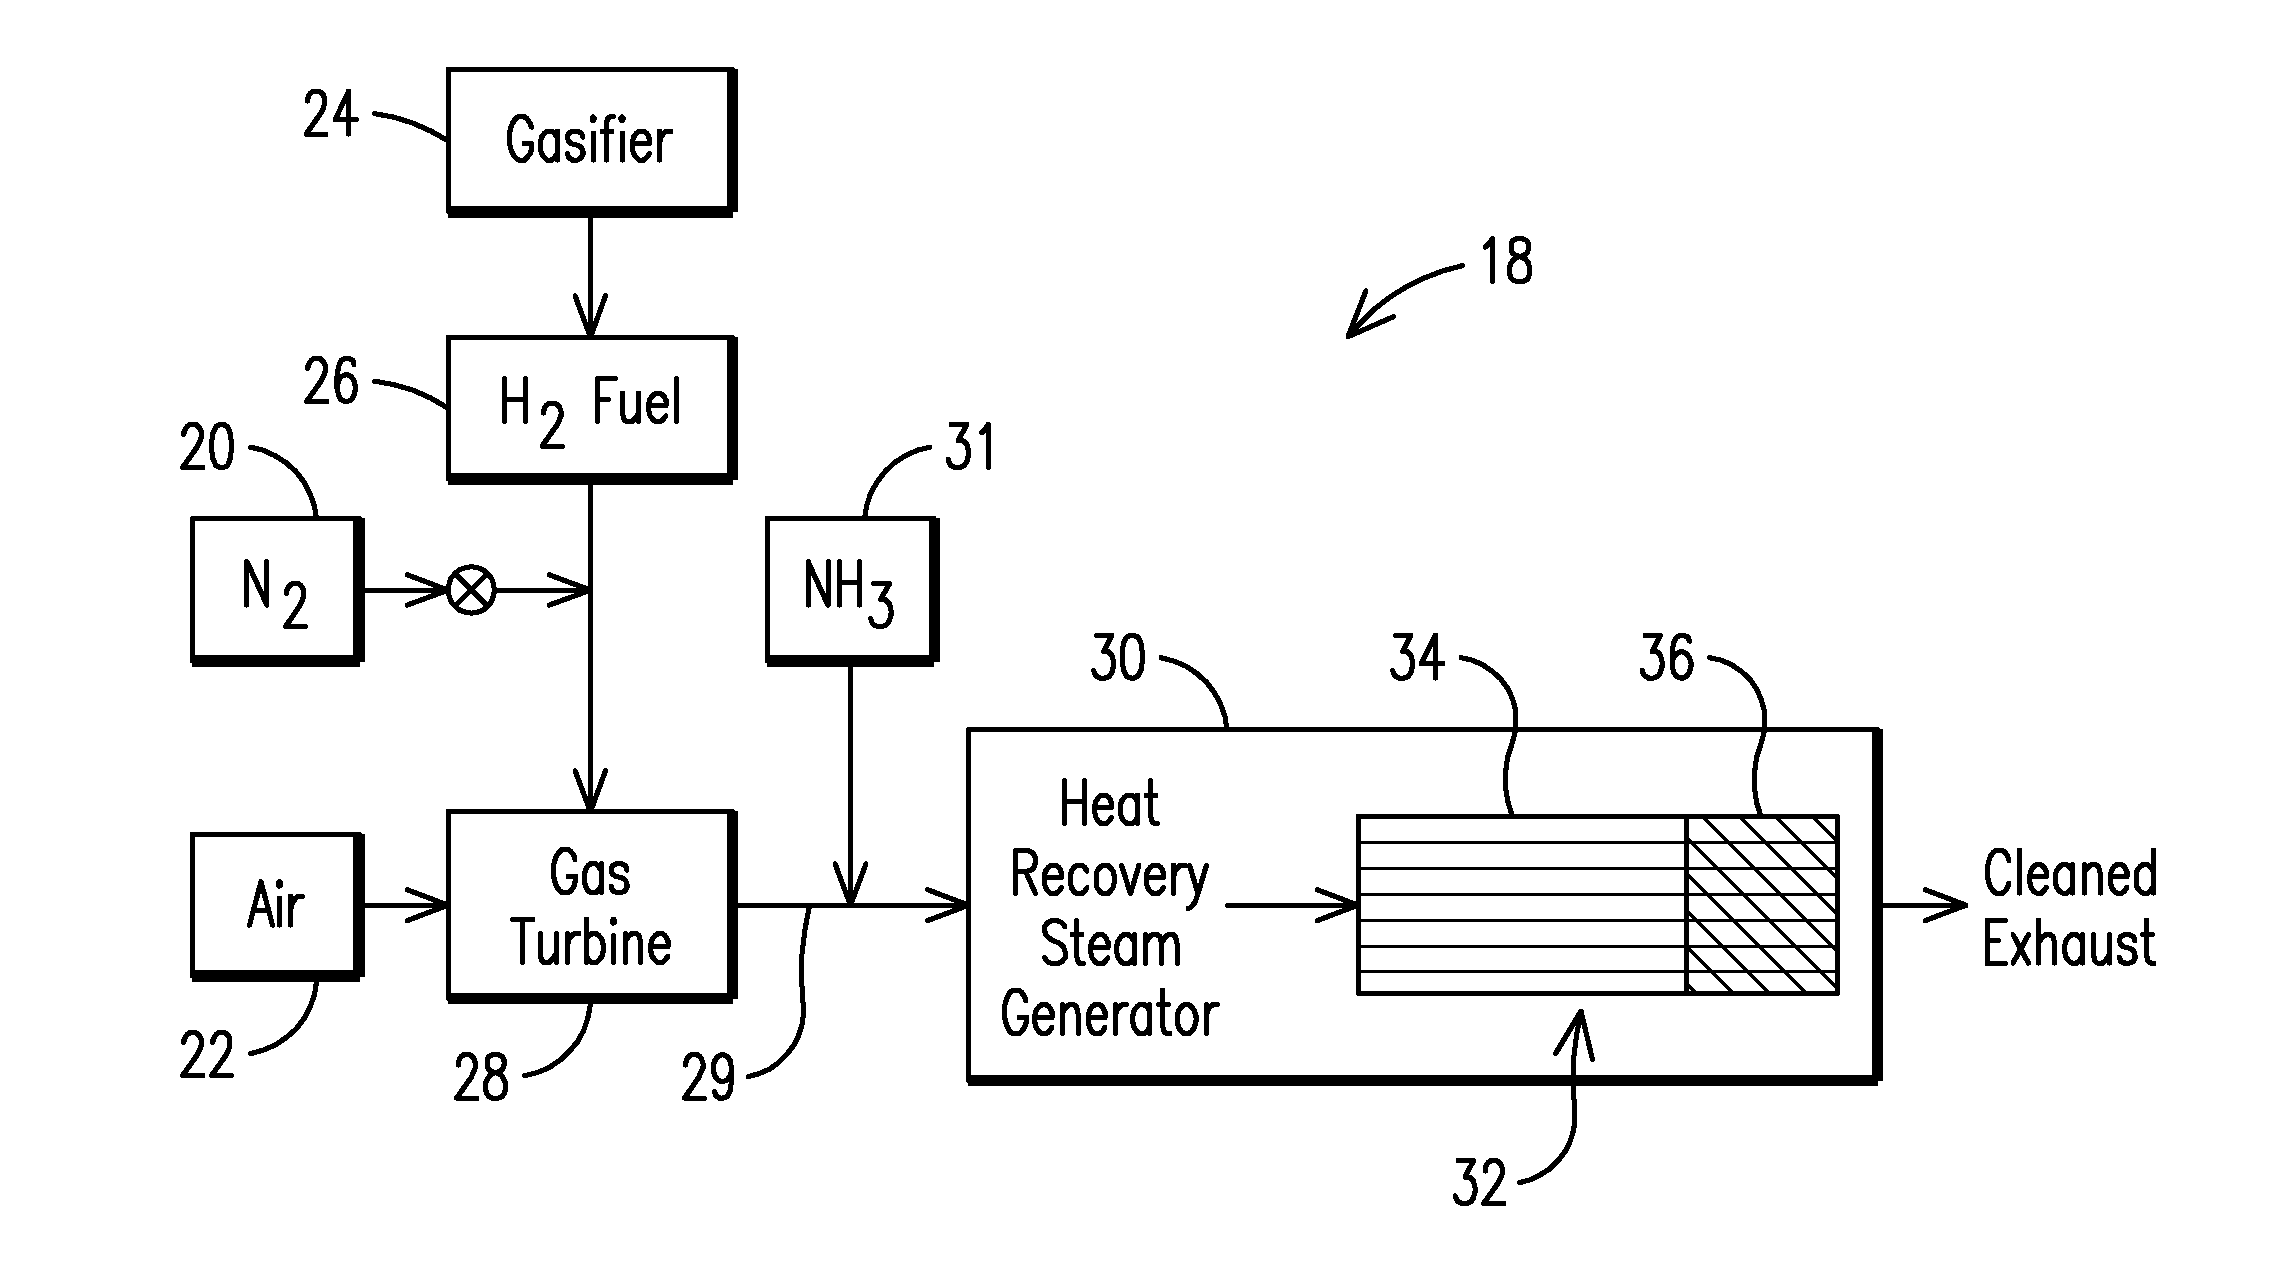 SELECTIVE CATALYTIC REDUCTION SYSTEM AND PROCESS FOR CONTROL OF NOx EMISSIONS IN A SULFUR-CONTAINING GAS STREAM